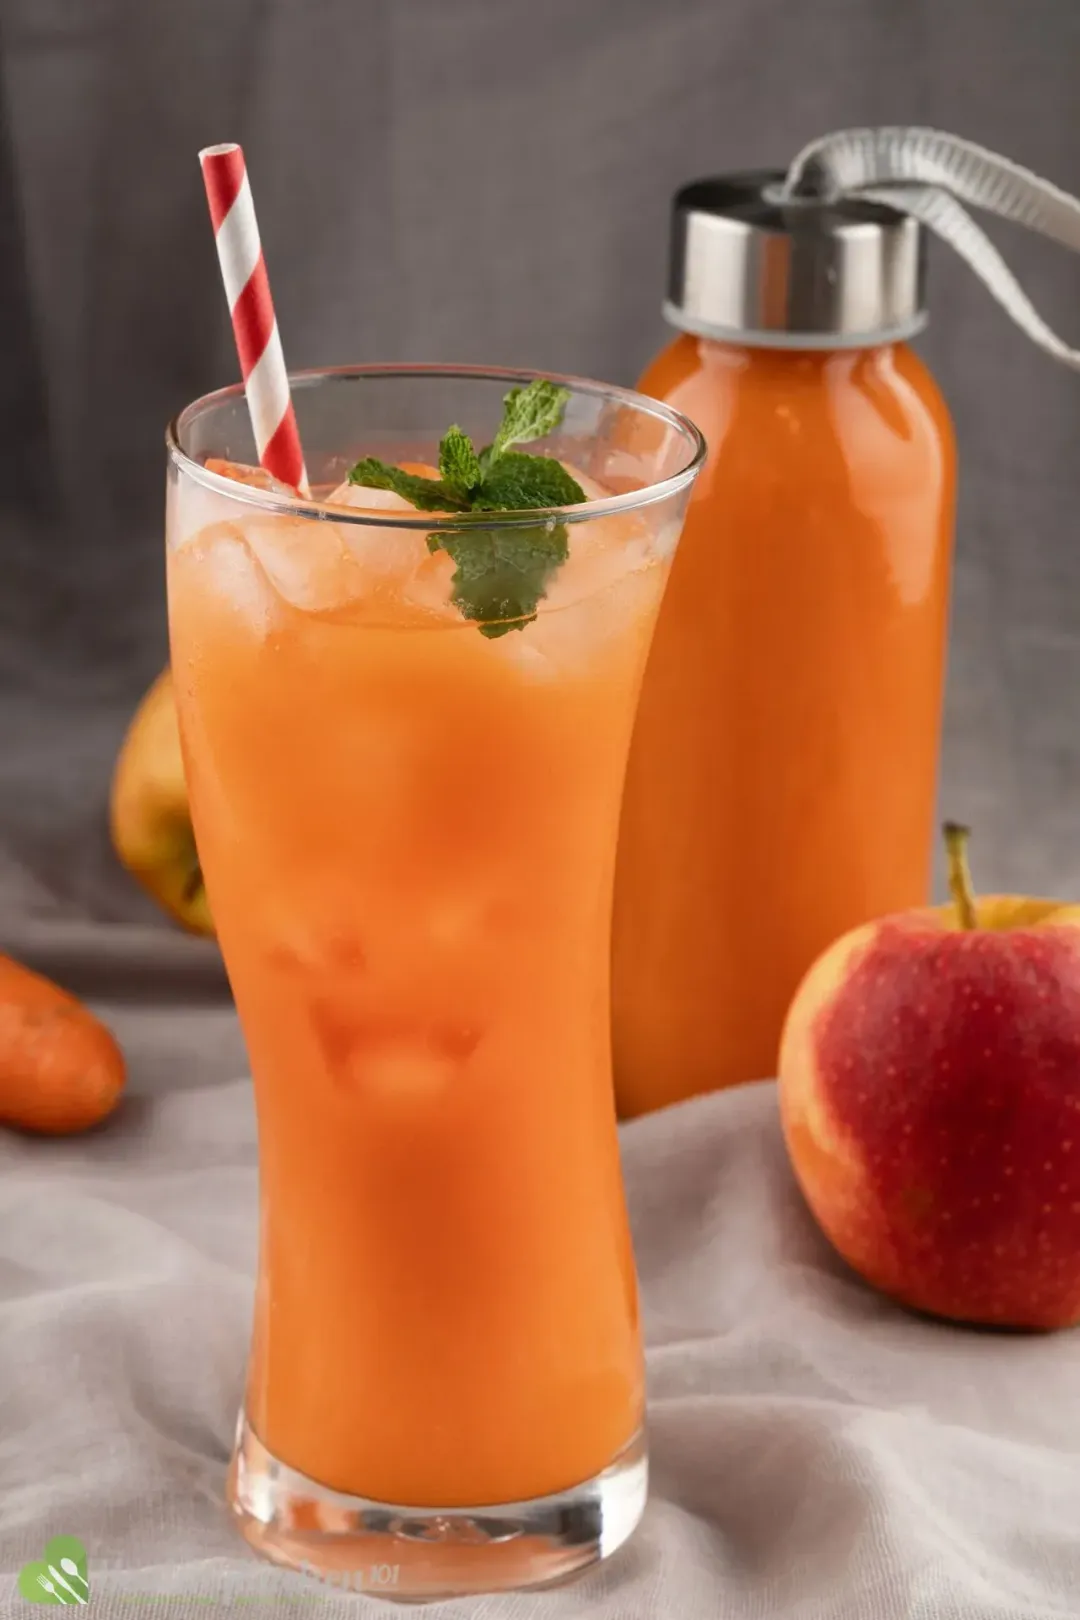 An iced glass of carrot juice next to a bottle of carrot juice and a red apple